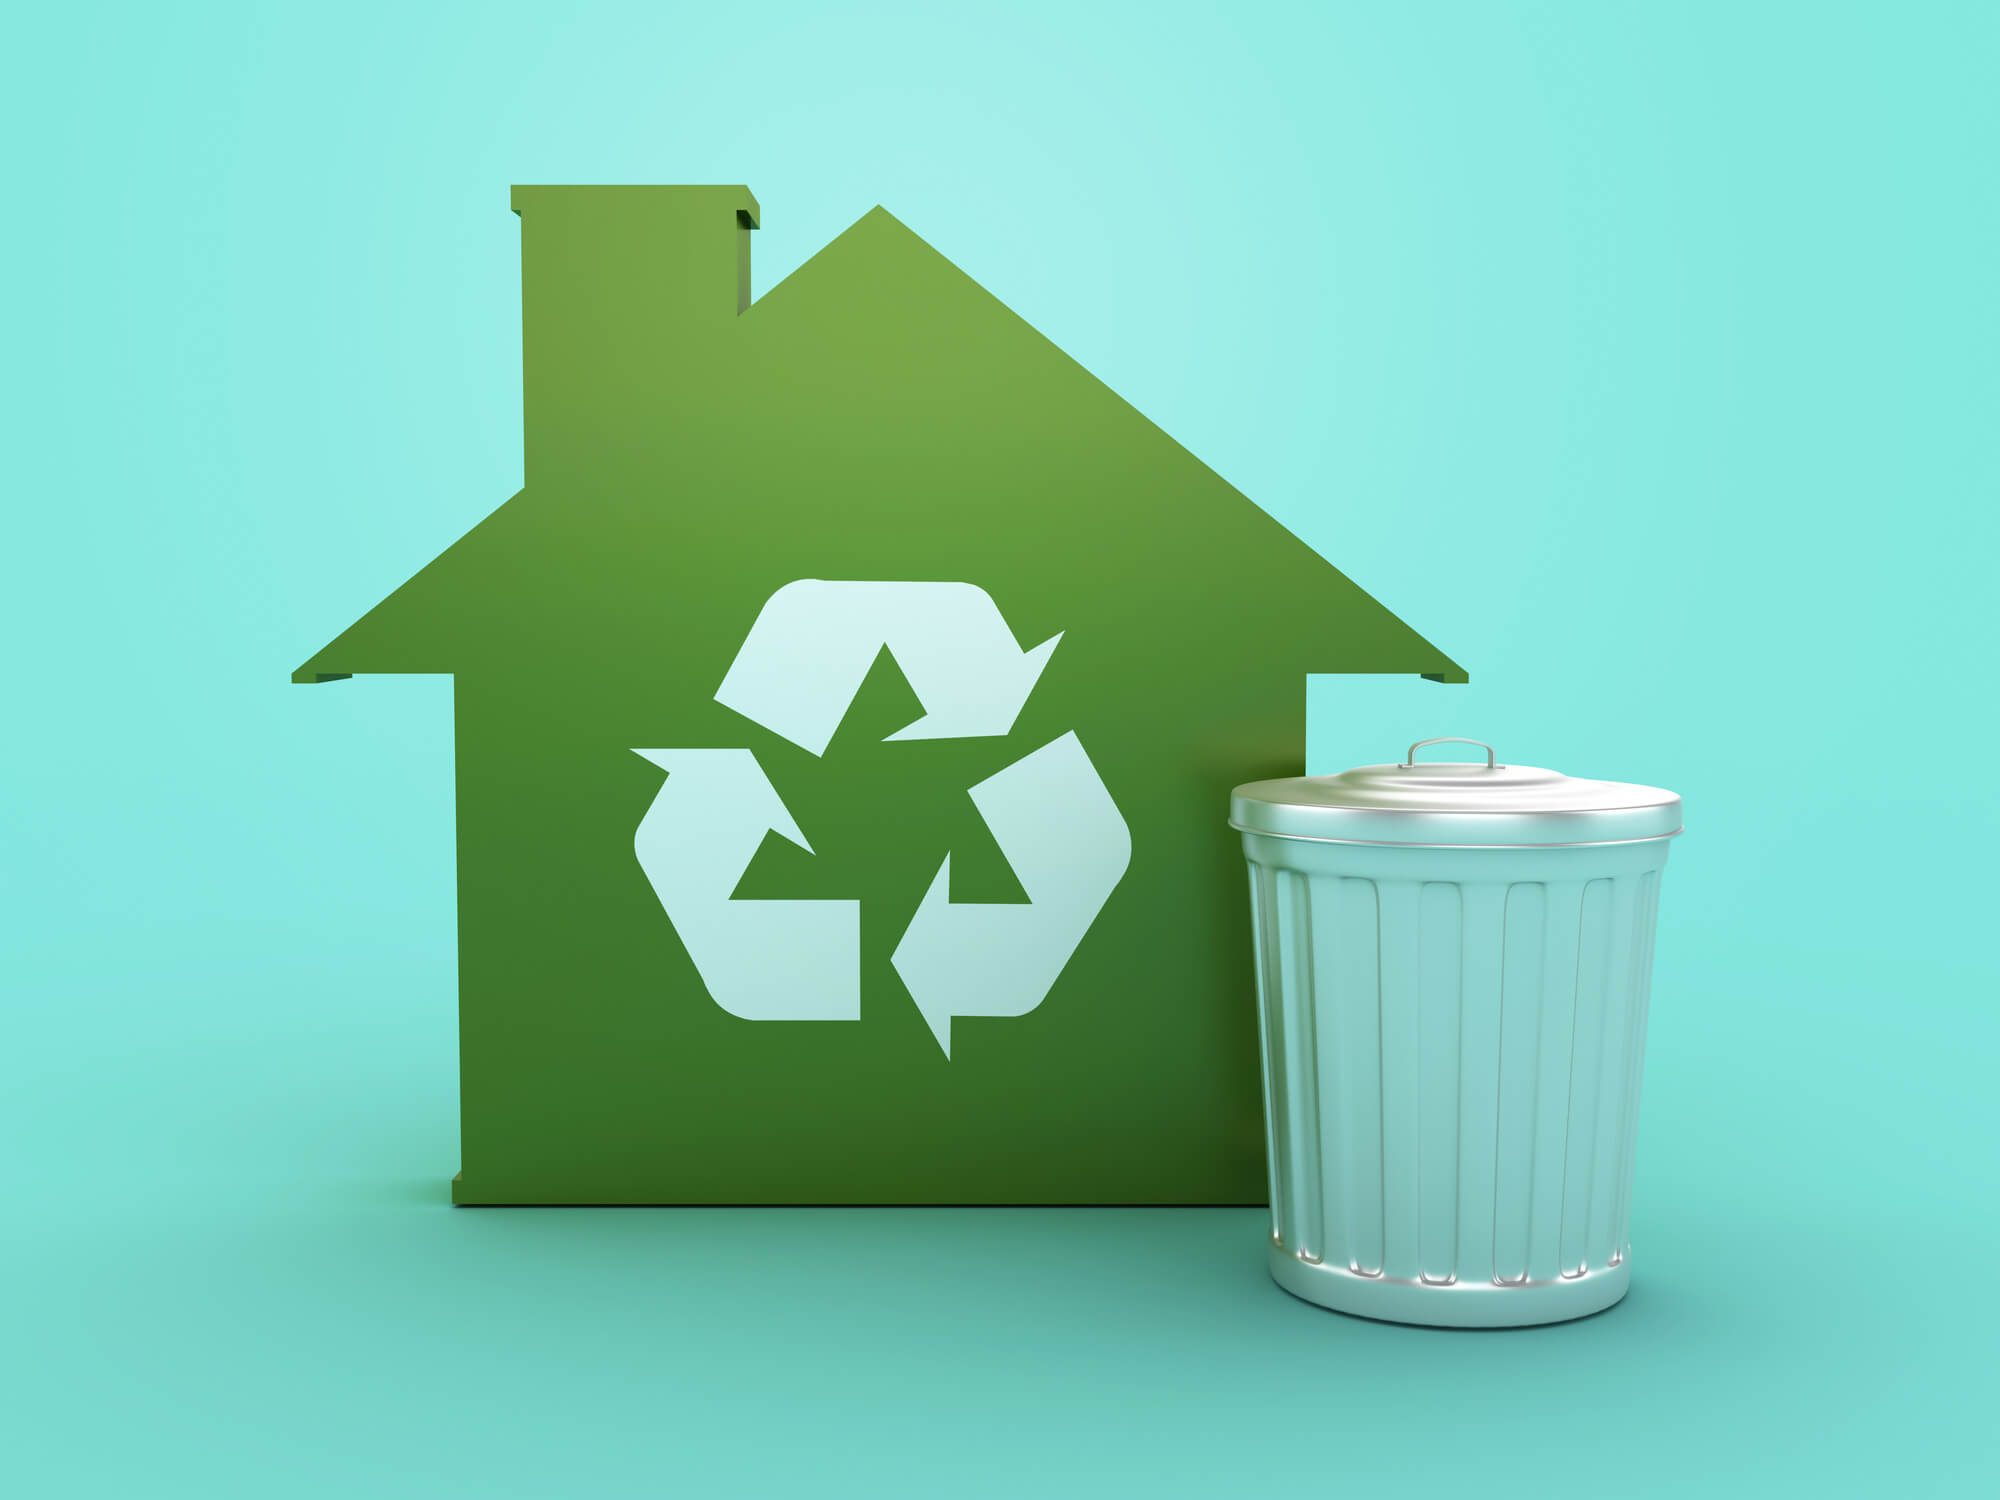 A green house-shaped recycling symbol next to a white trash can on a light blue background for a dumpster rental franchise opportunity